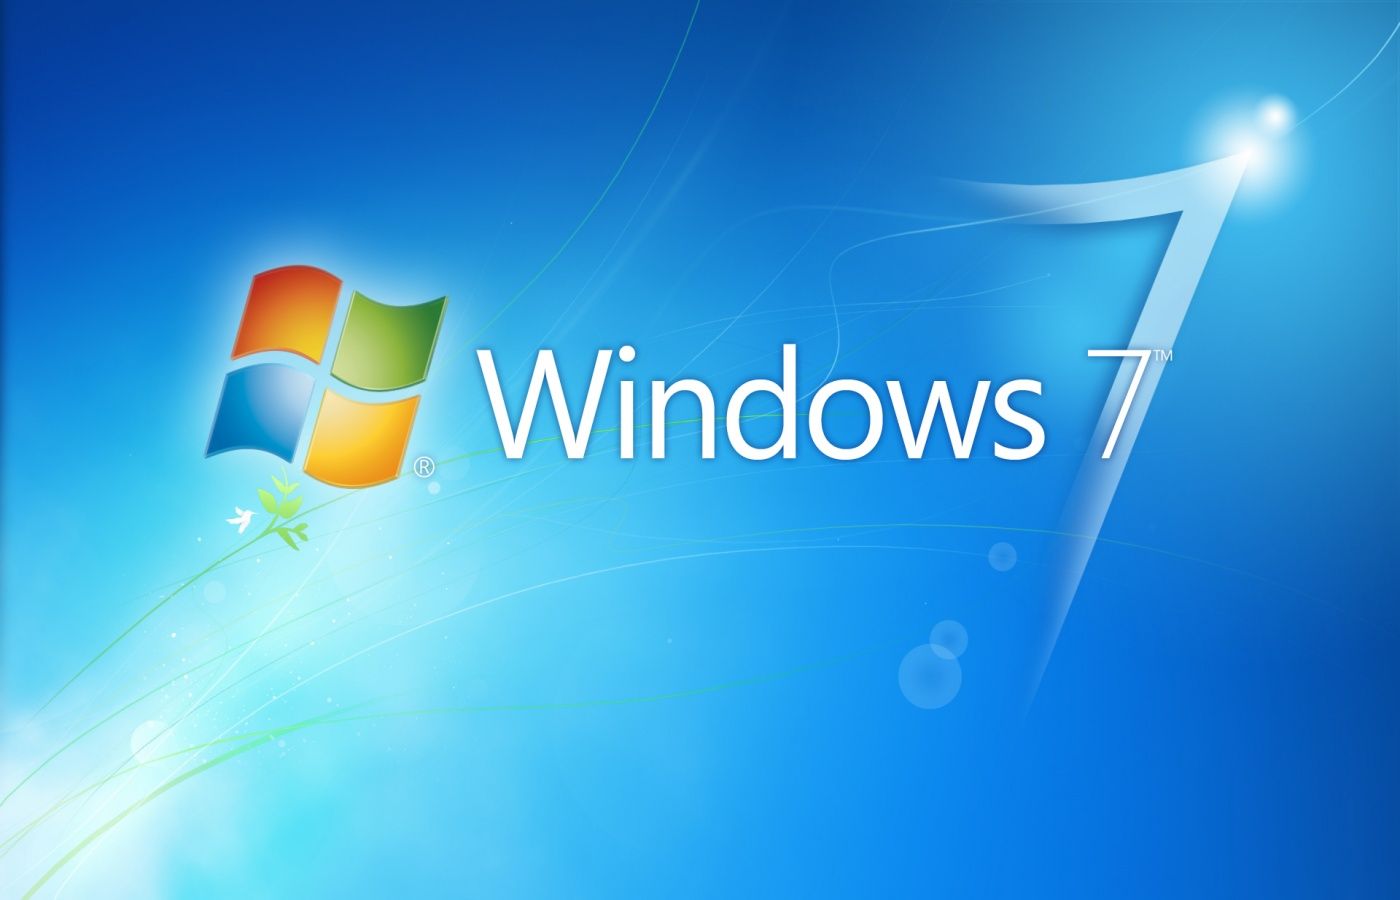 Free download Windows 7 Logo Wallpaper PC Android iPhone and iPad